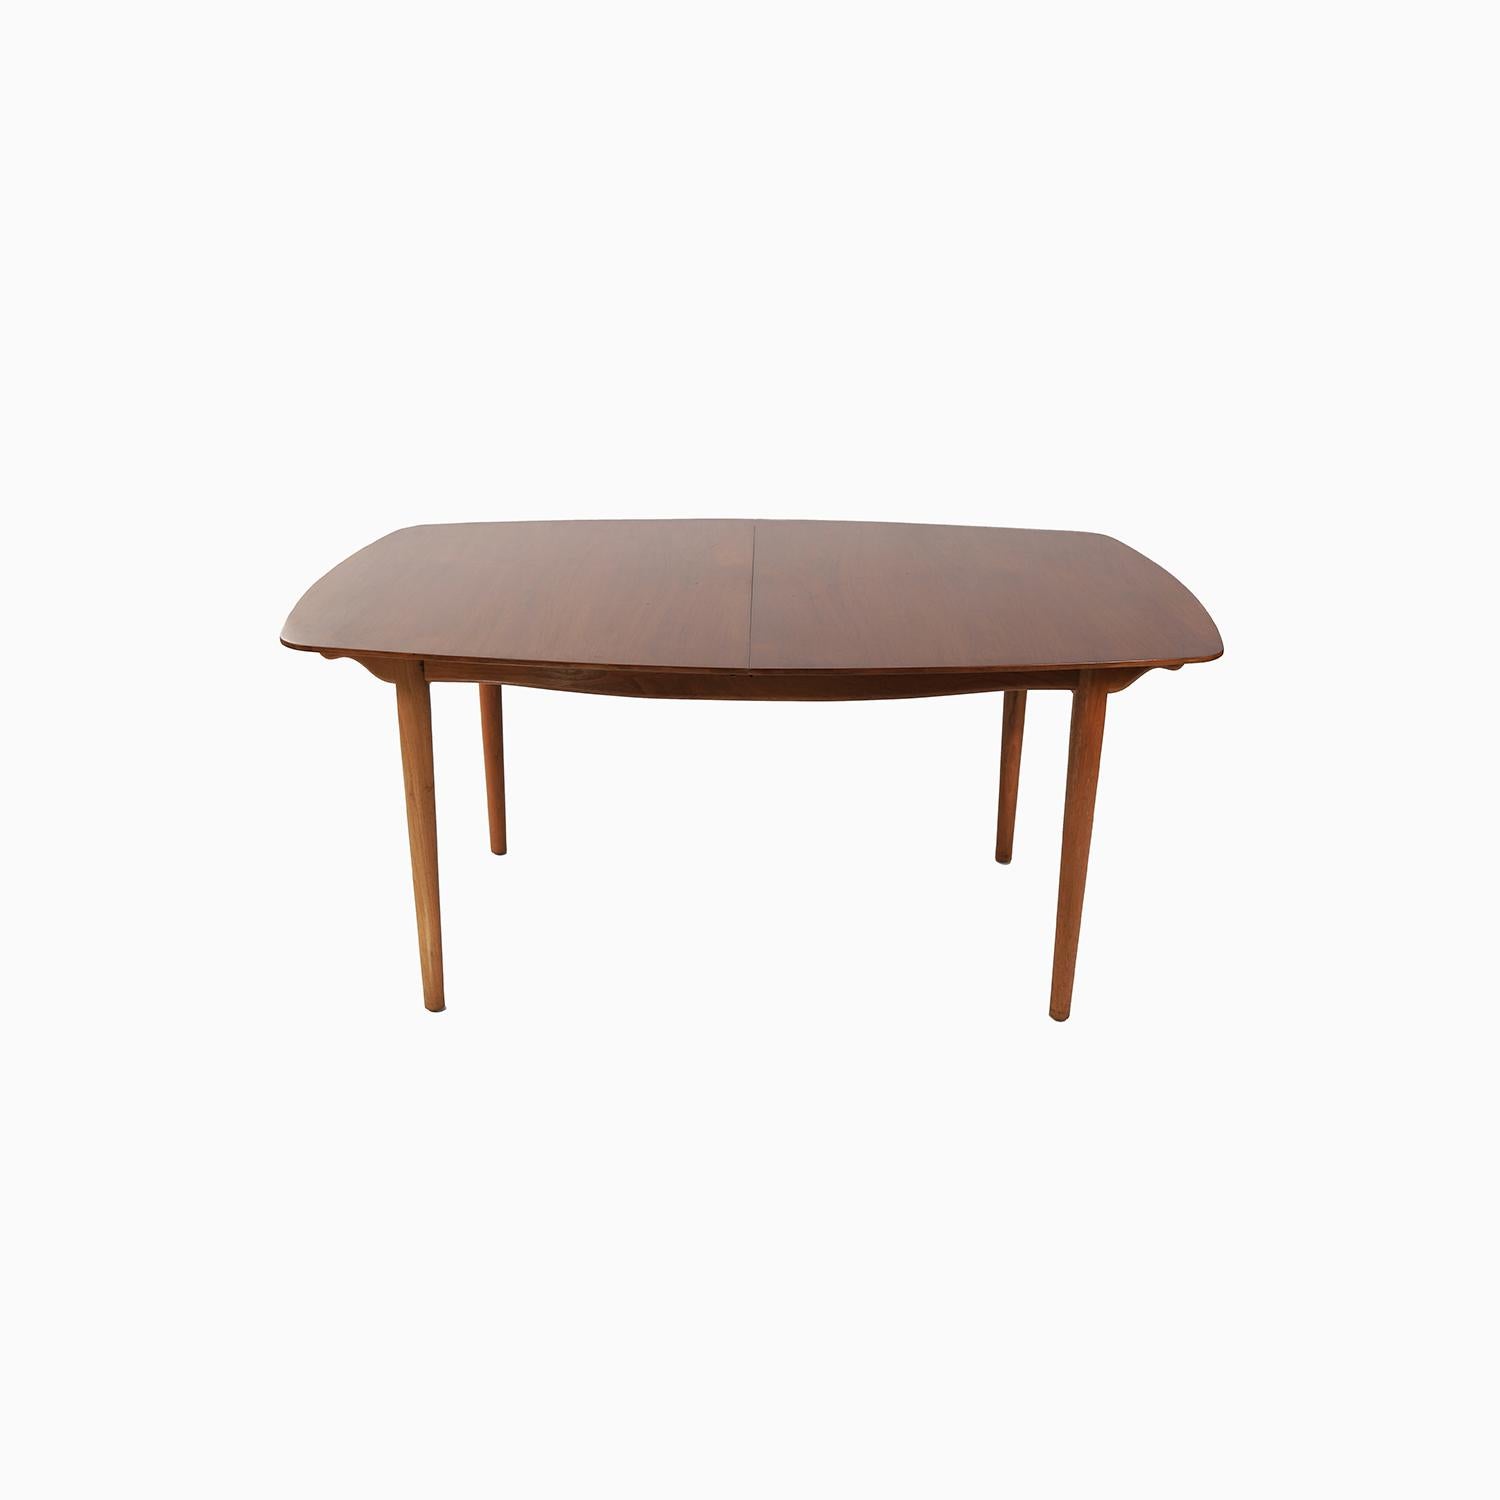 A Danish Modern design by Finn Juhl for American manufacturer Baker Furniture. This relationship between Juhl and Baker catipulted Danish Modern furniture into the homes of many Americans. A beautiful boat shaped design in American walnut with a